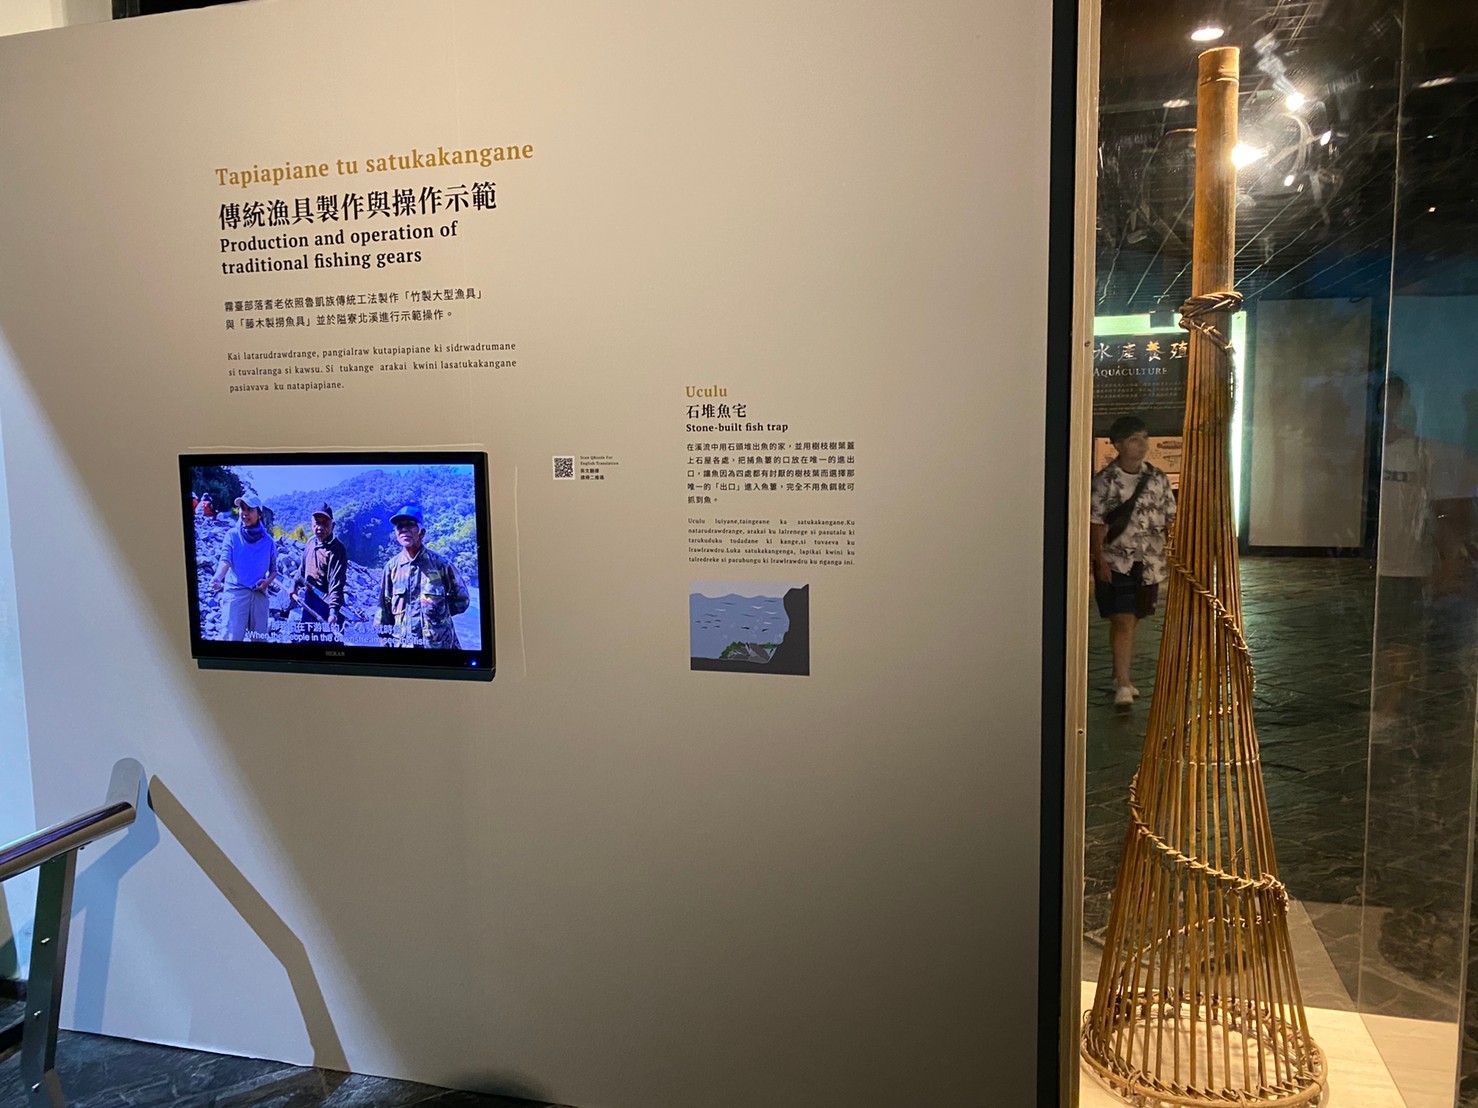 NSYSU, Rukai Cultural Museum in Wutai Township, Wutai Elementary School, and National Museum of Marine Biology and Aquarium jointly organize exhibition on Rukai Fish and River Fishing